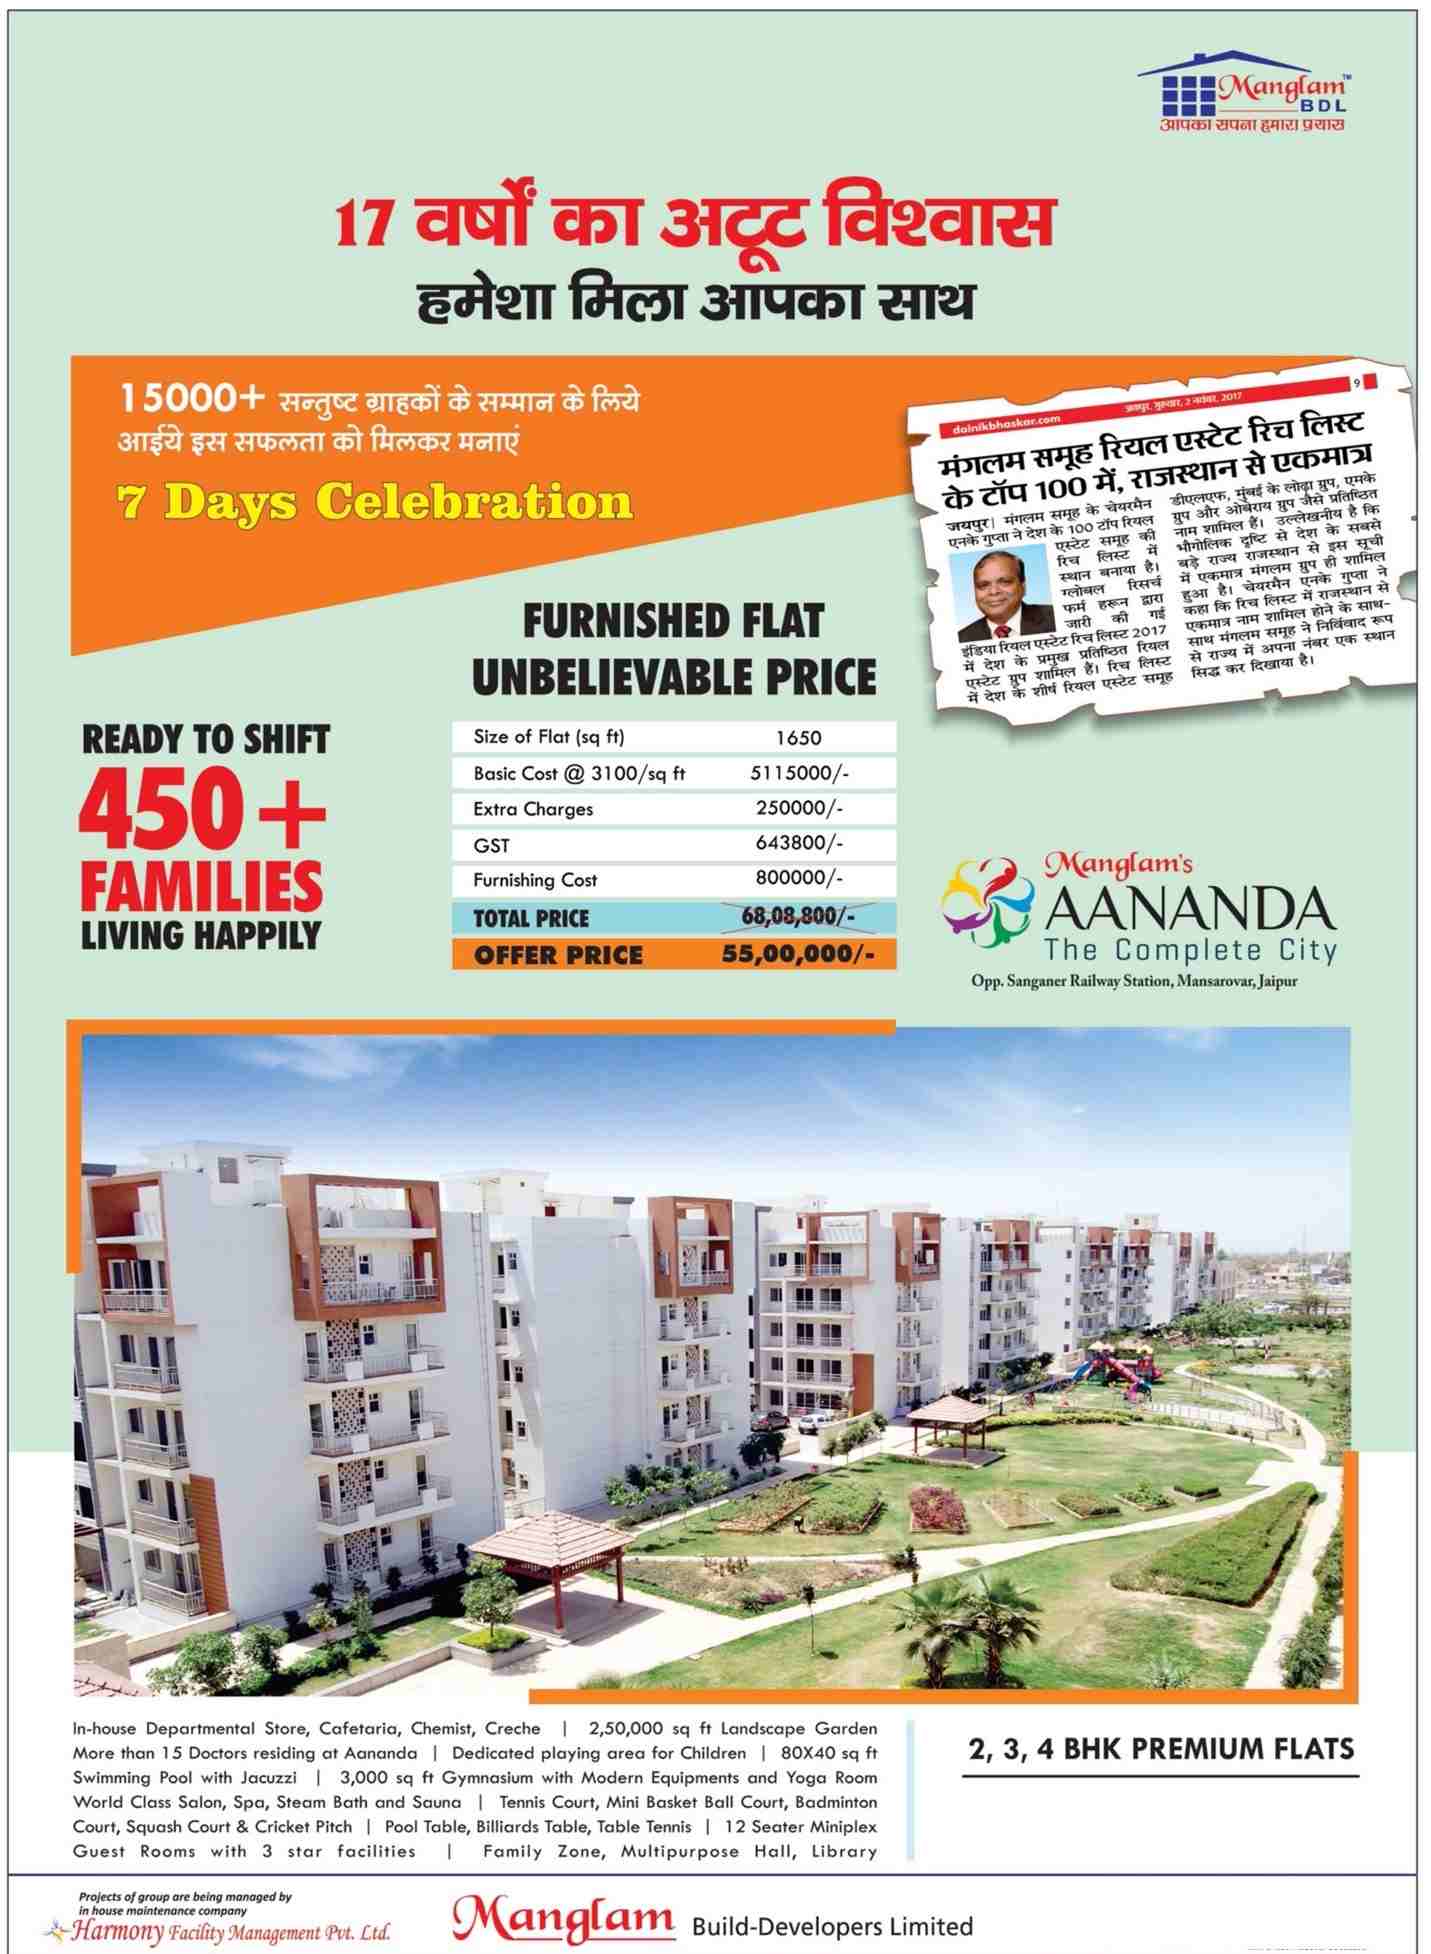 Manglam Aananda is now ready to move in Jaipur Update